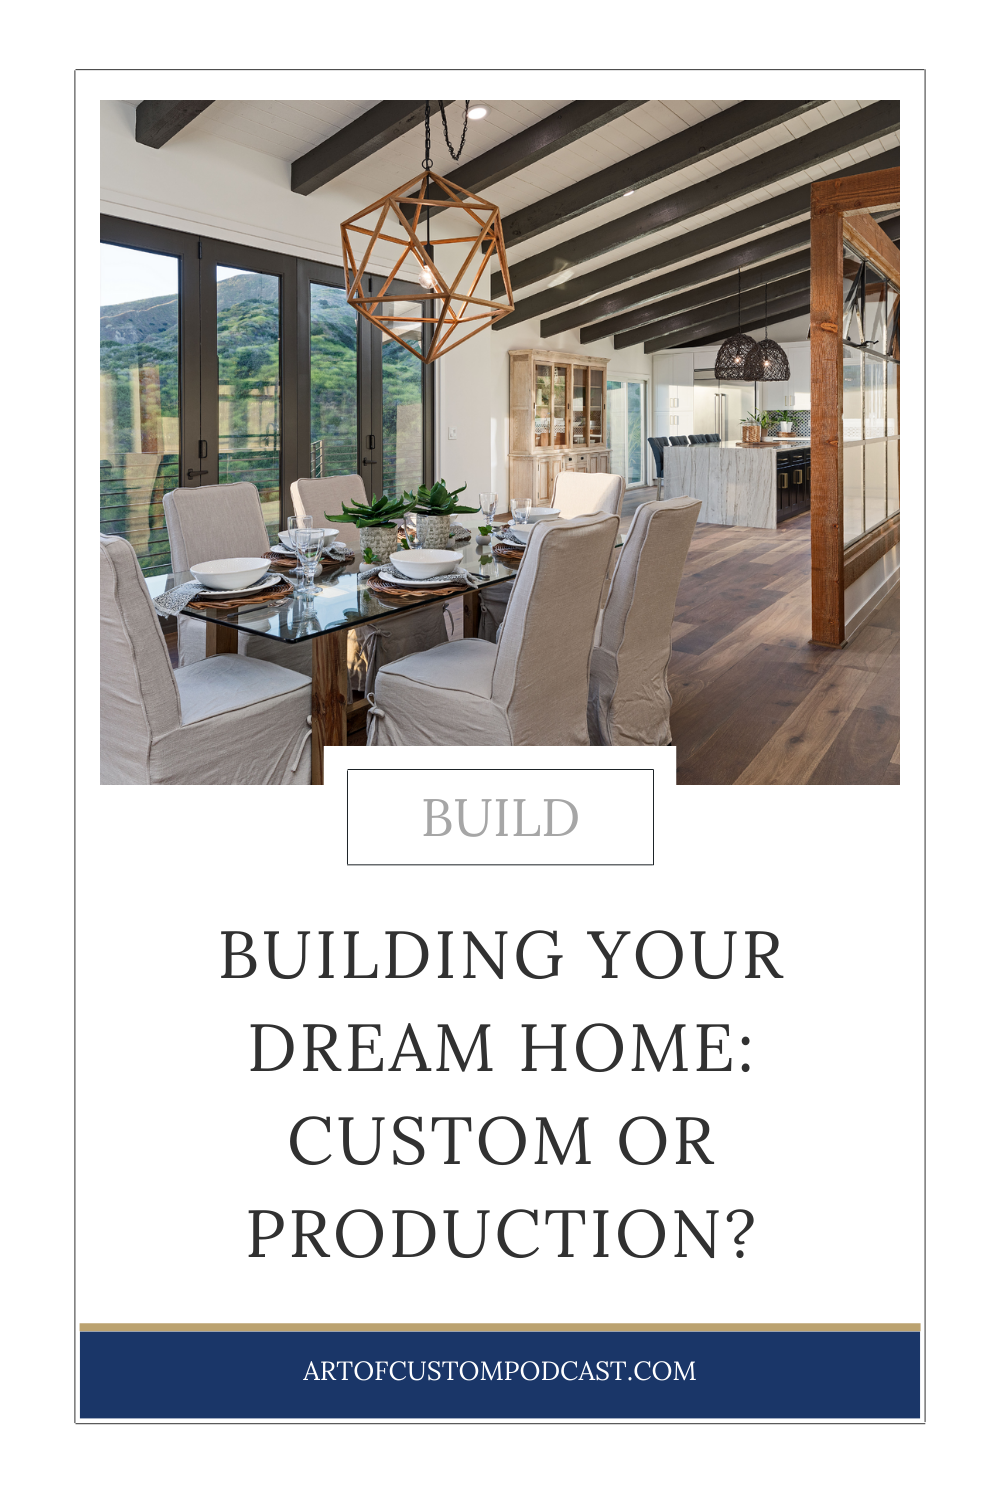 Building Your Dream Home: Should I Build Custom or Production?